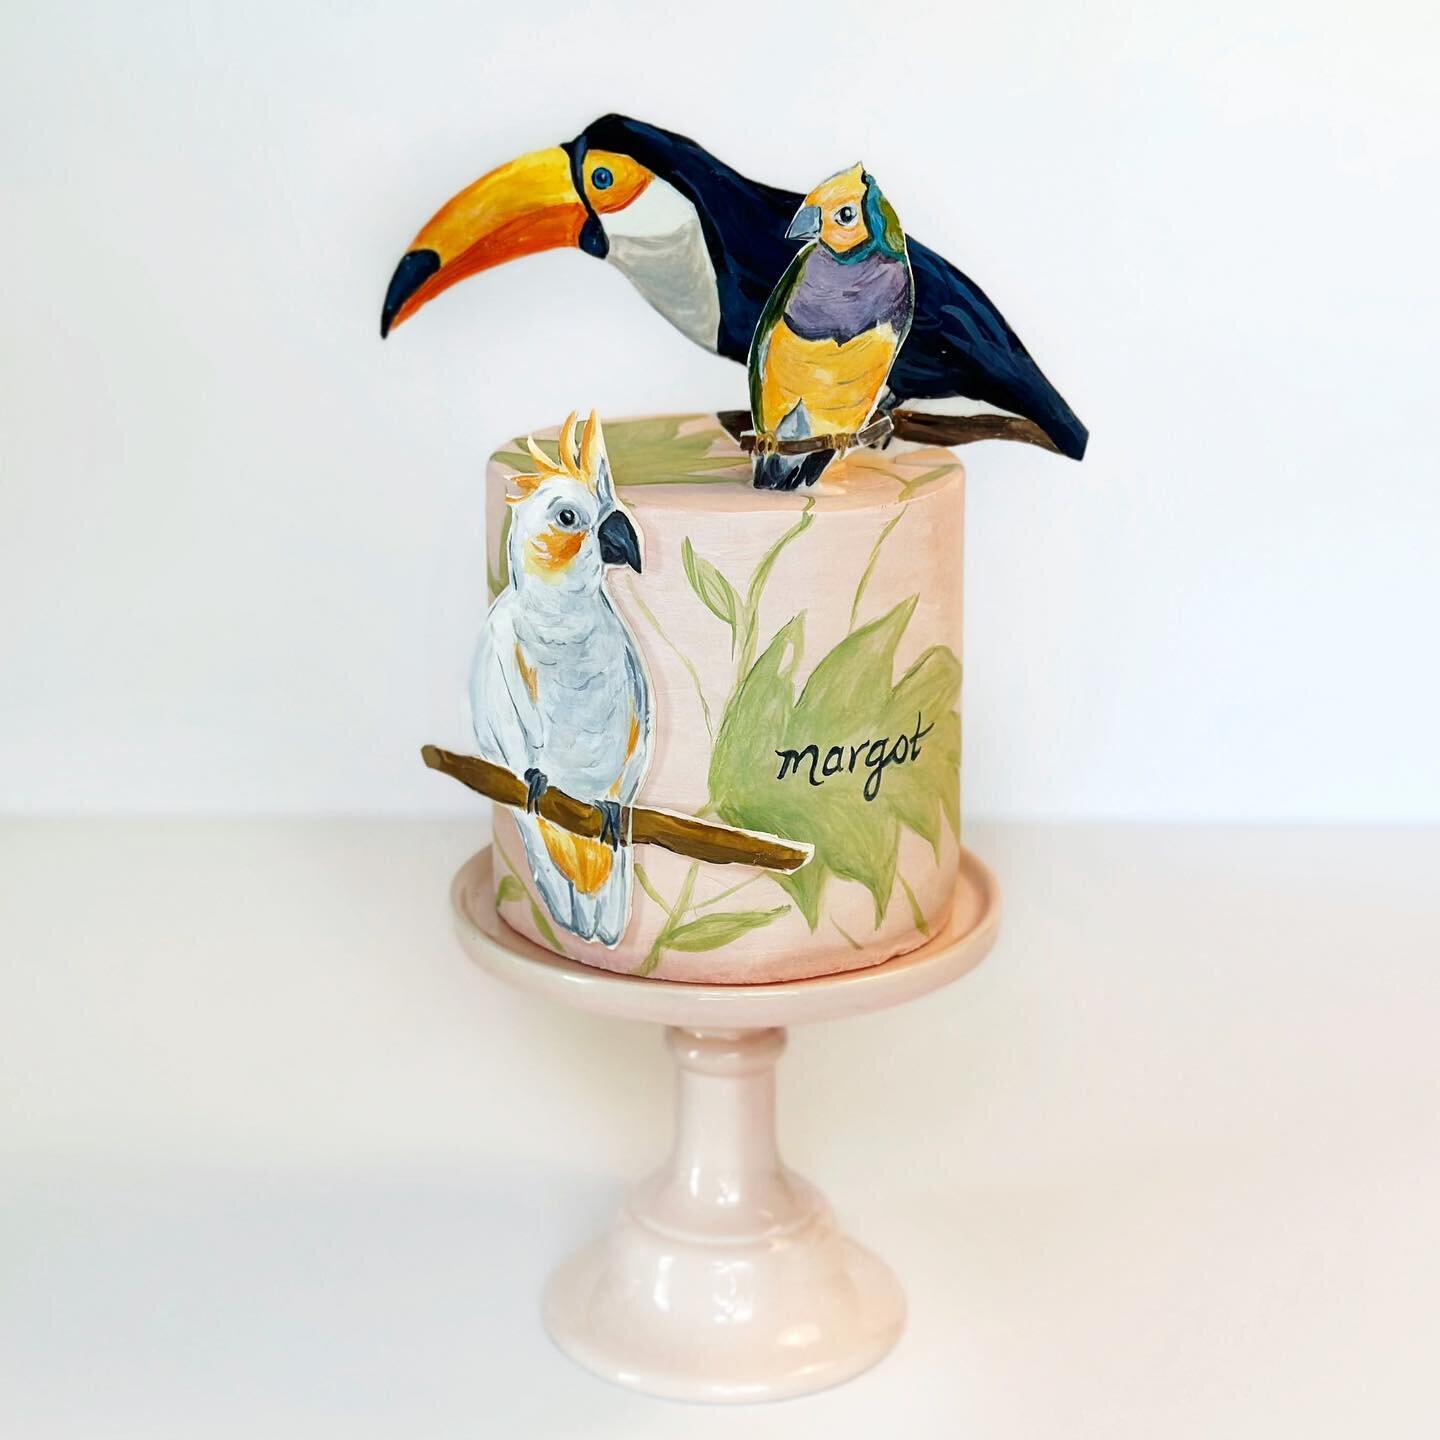 Margot&rsquo;s very first birthday cake! Wanted to share a better photo of the cake I made to celebrate Margot&rsquo;s introduction to the world - and of course another baby photo :)
Featuring hand painted tropical birds and layers of dark chocolate 